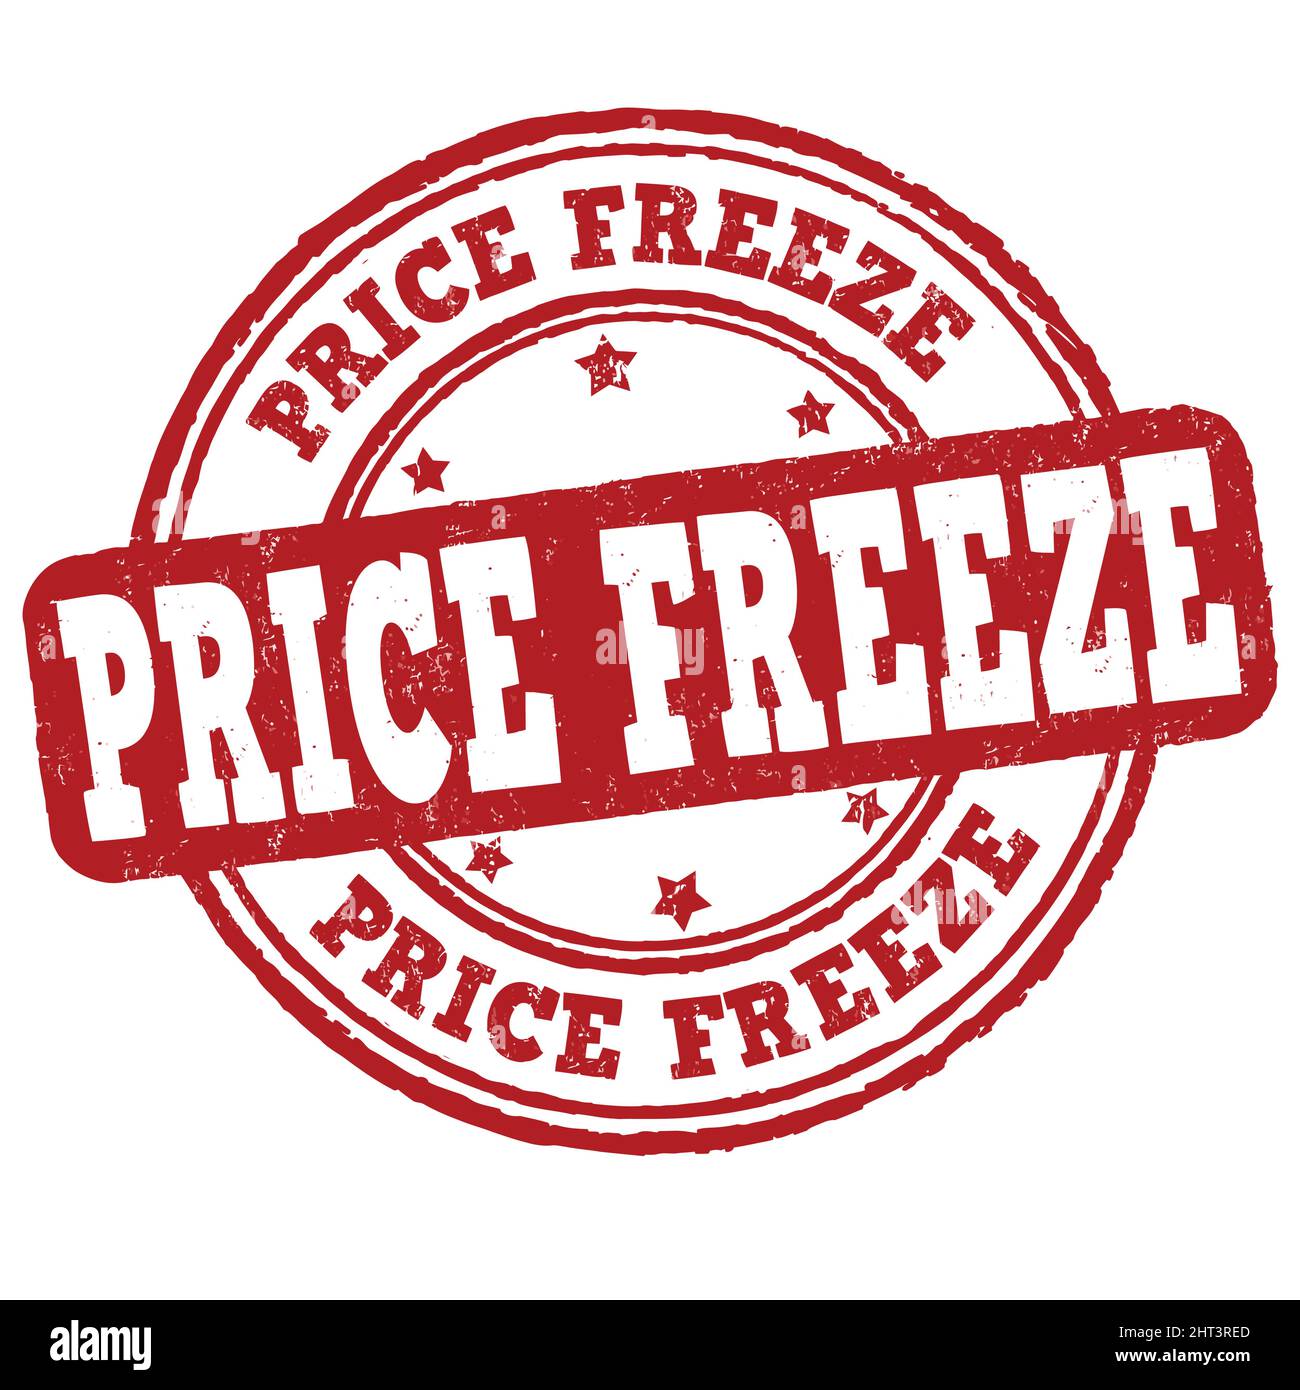 Price freeze grunge rubber stamp on white background, vector illustration Stock Vector